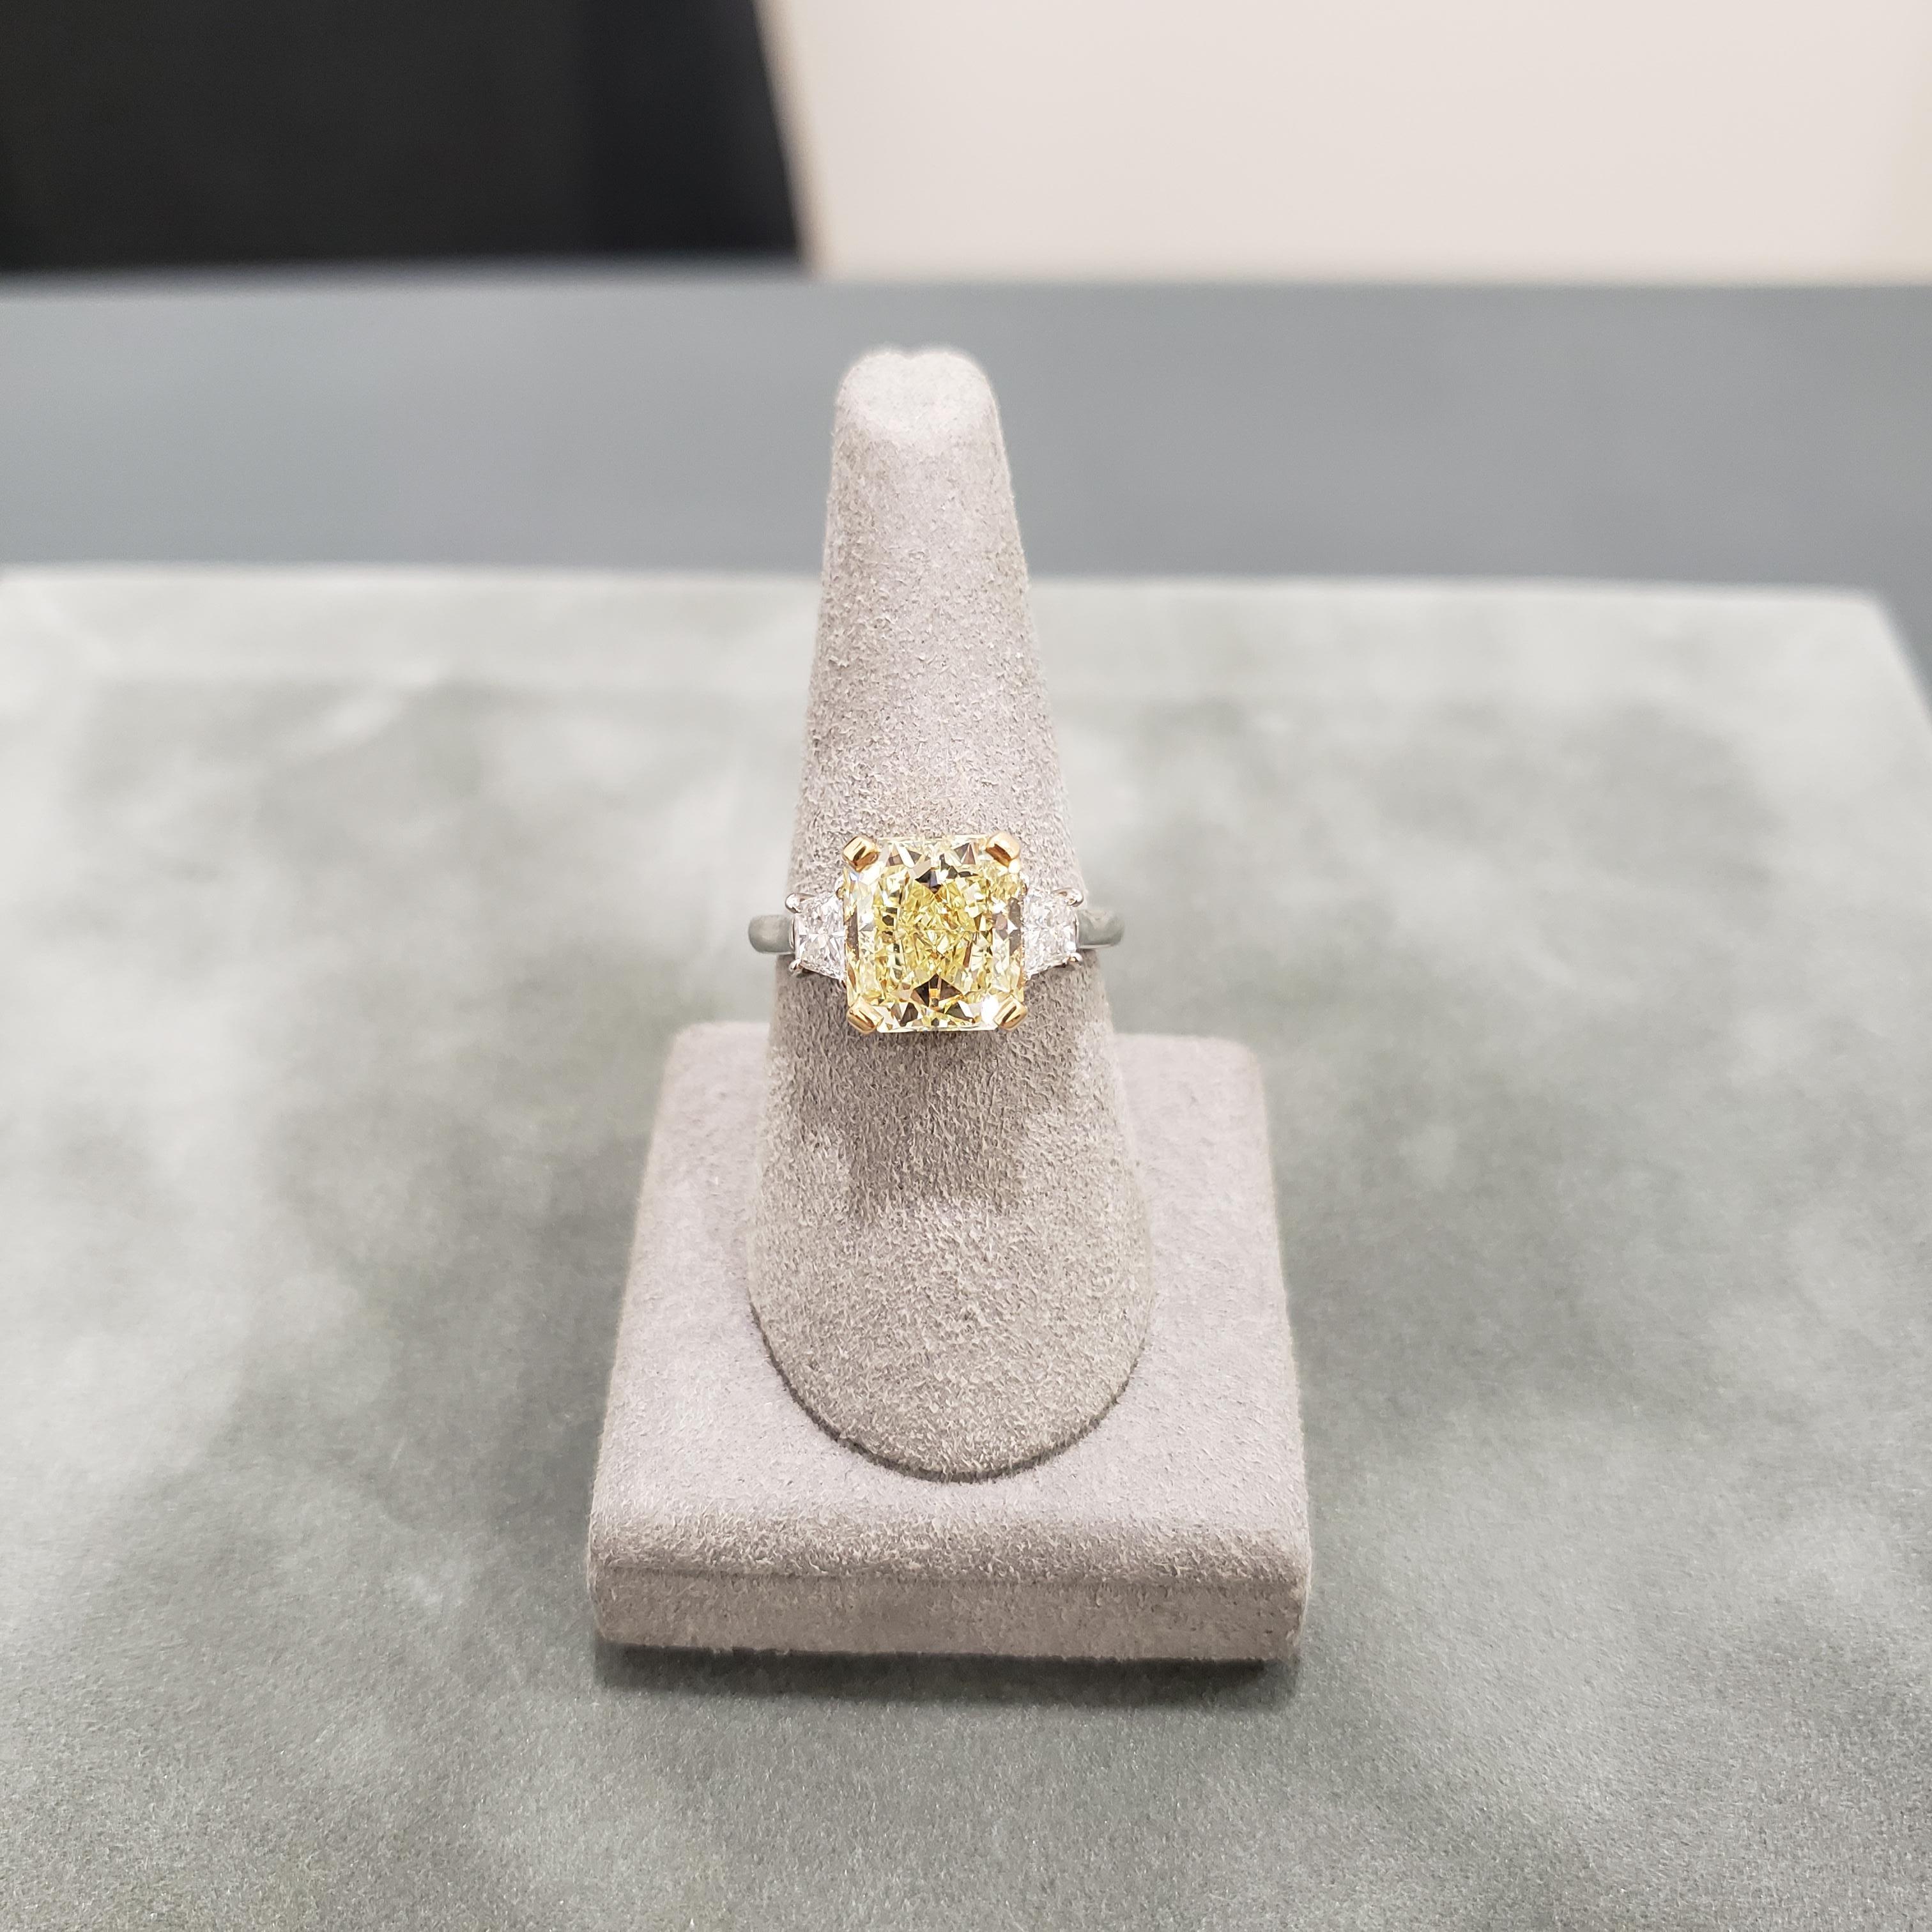 A classic and timeless engagement ring featuring a 4.01 carat radiant cut diamond certified by GIA as Fancy Yellow, VS1 clarity, accented by trapezoid diamonds on each side. Accent diamonds weigh 0.56 carats total. Set in a polished platinum